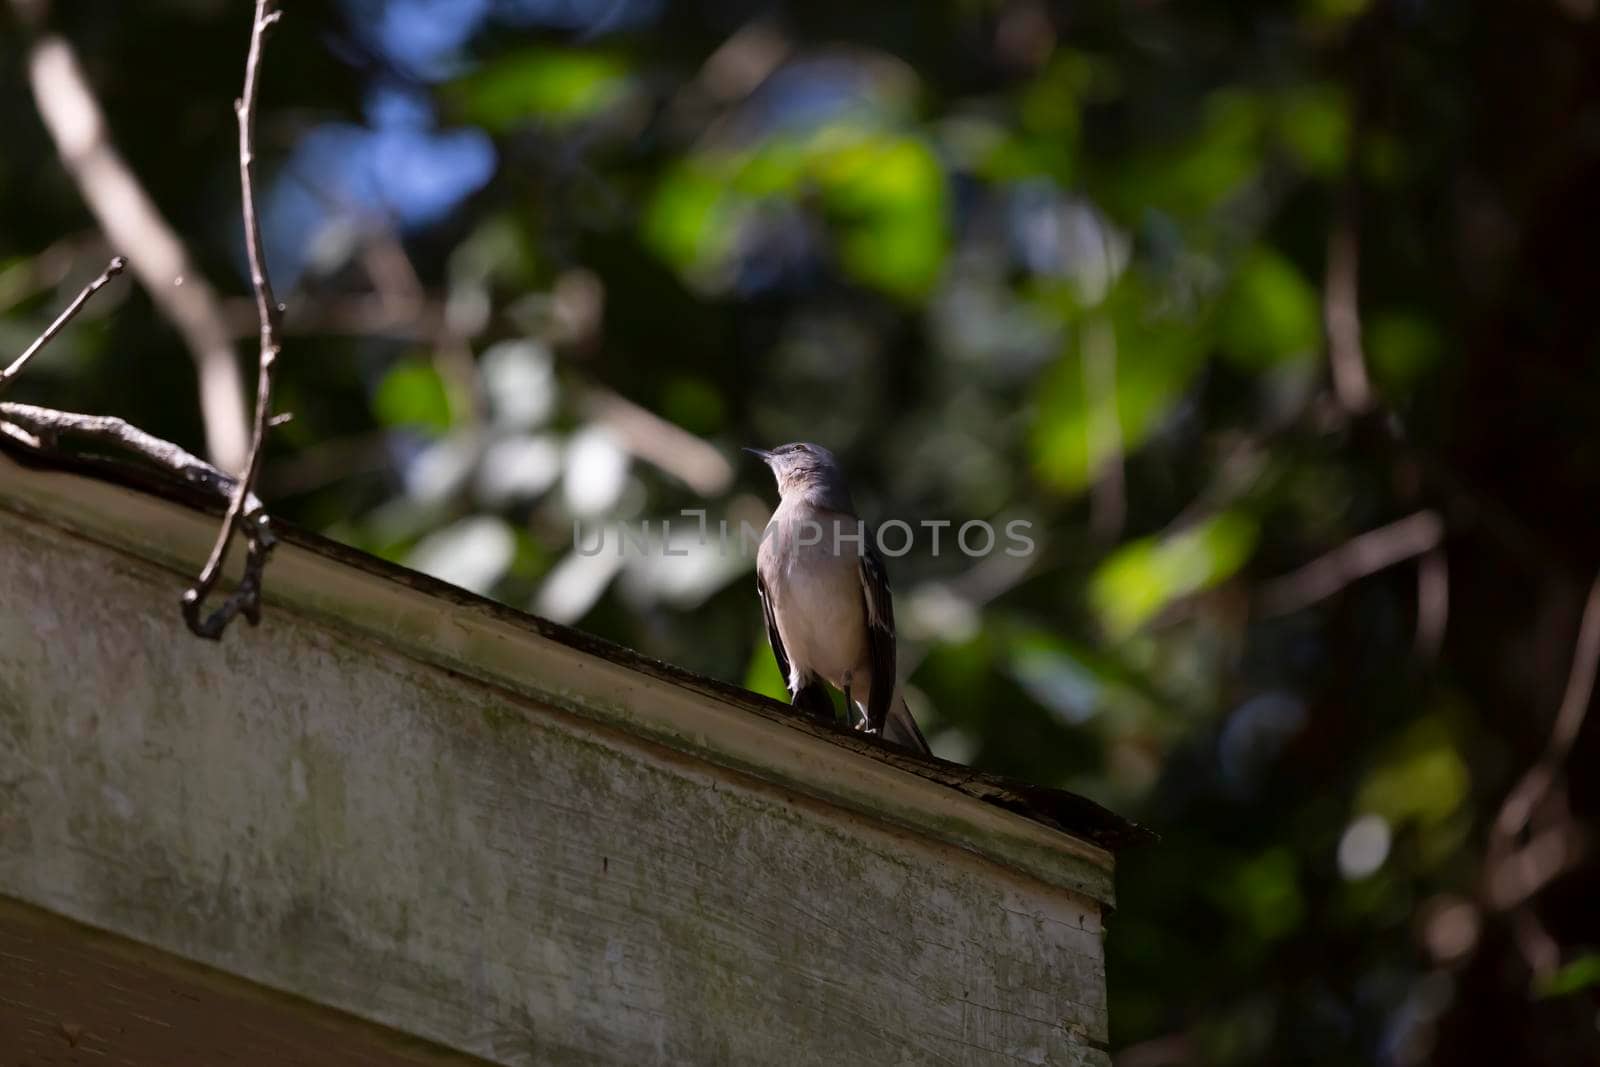 Curious nothern mockingbird (Mimus poslyglotto) looking back from its perch on a roof